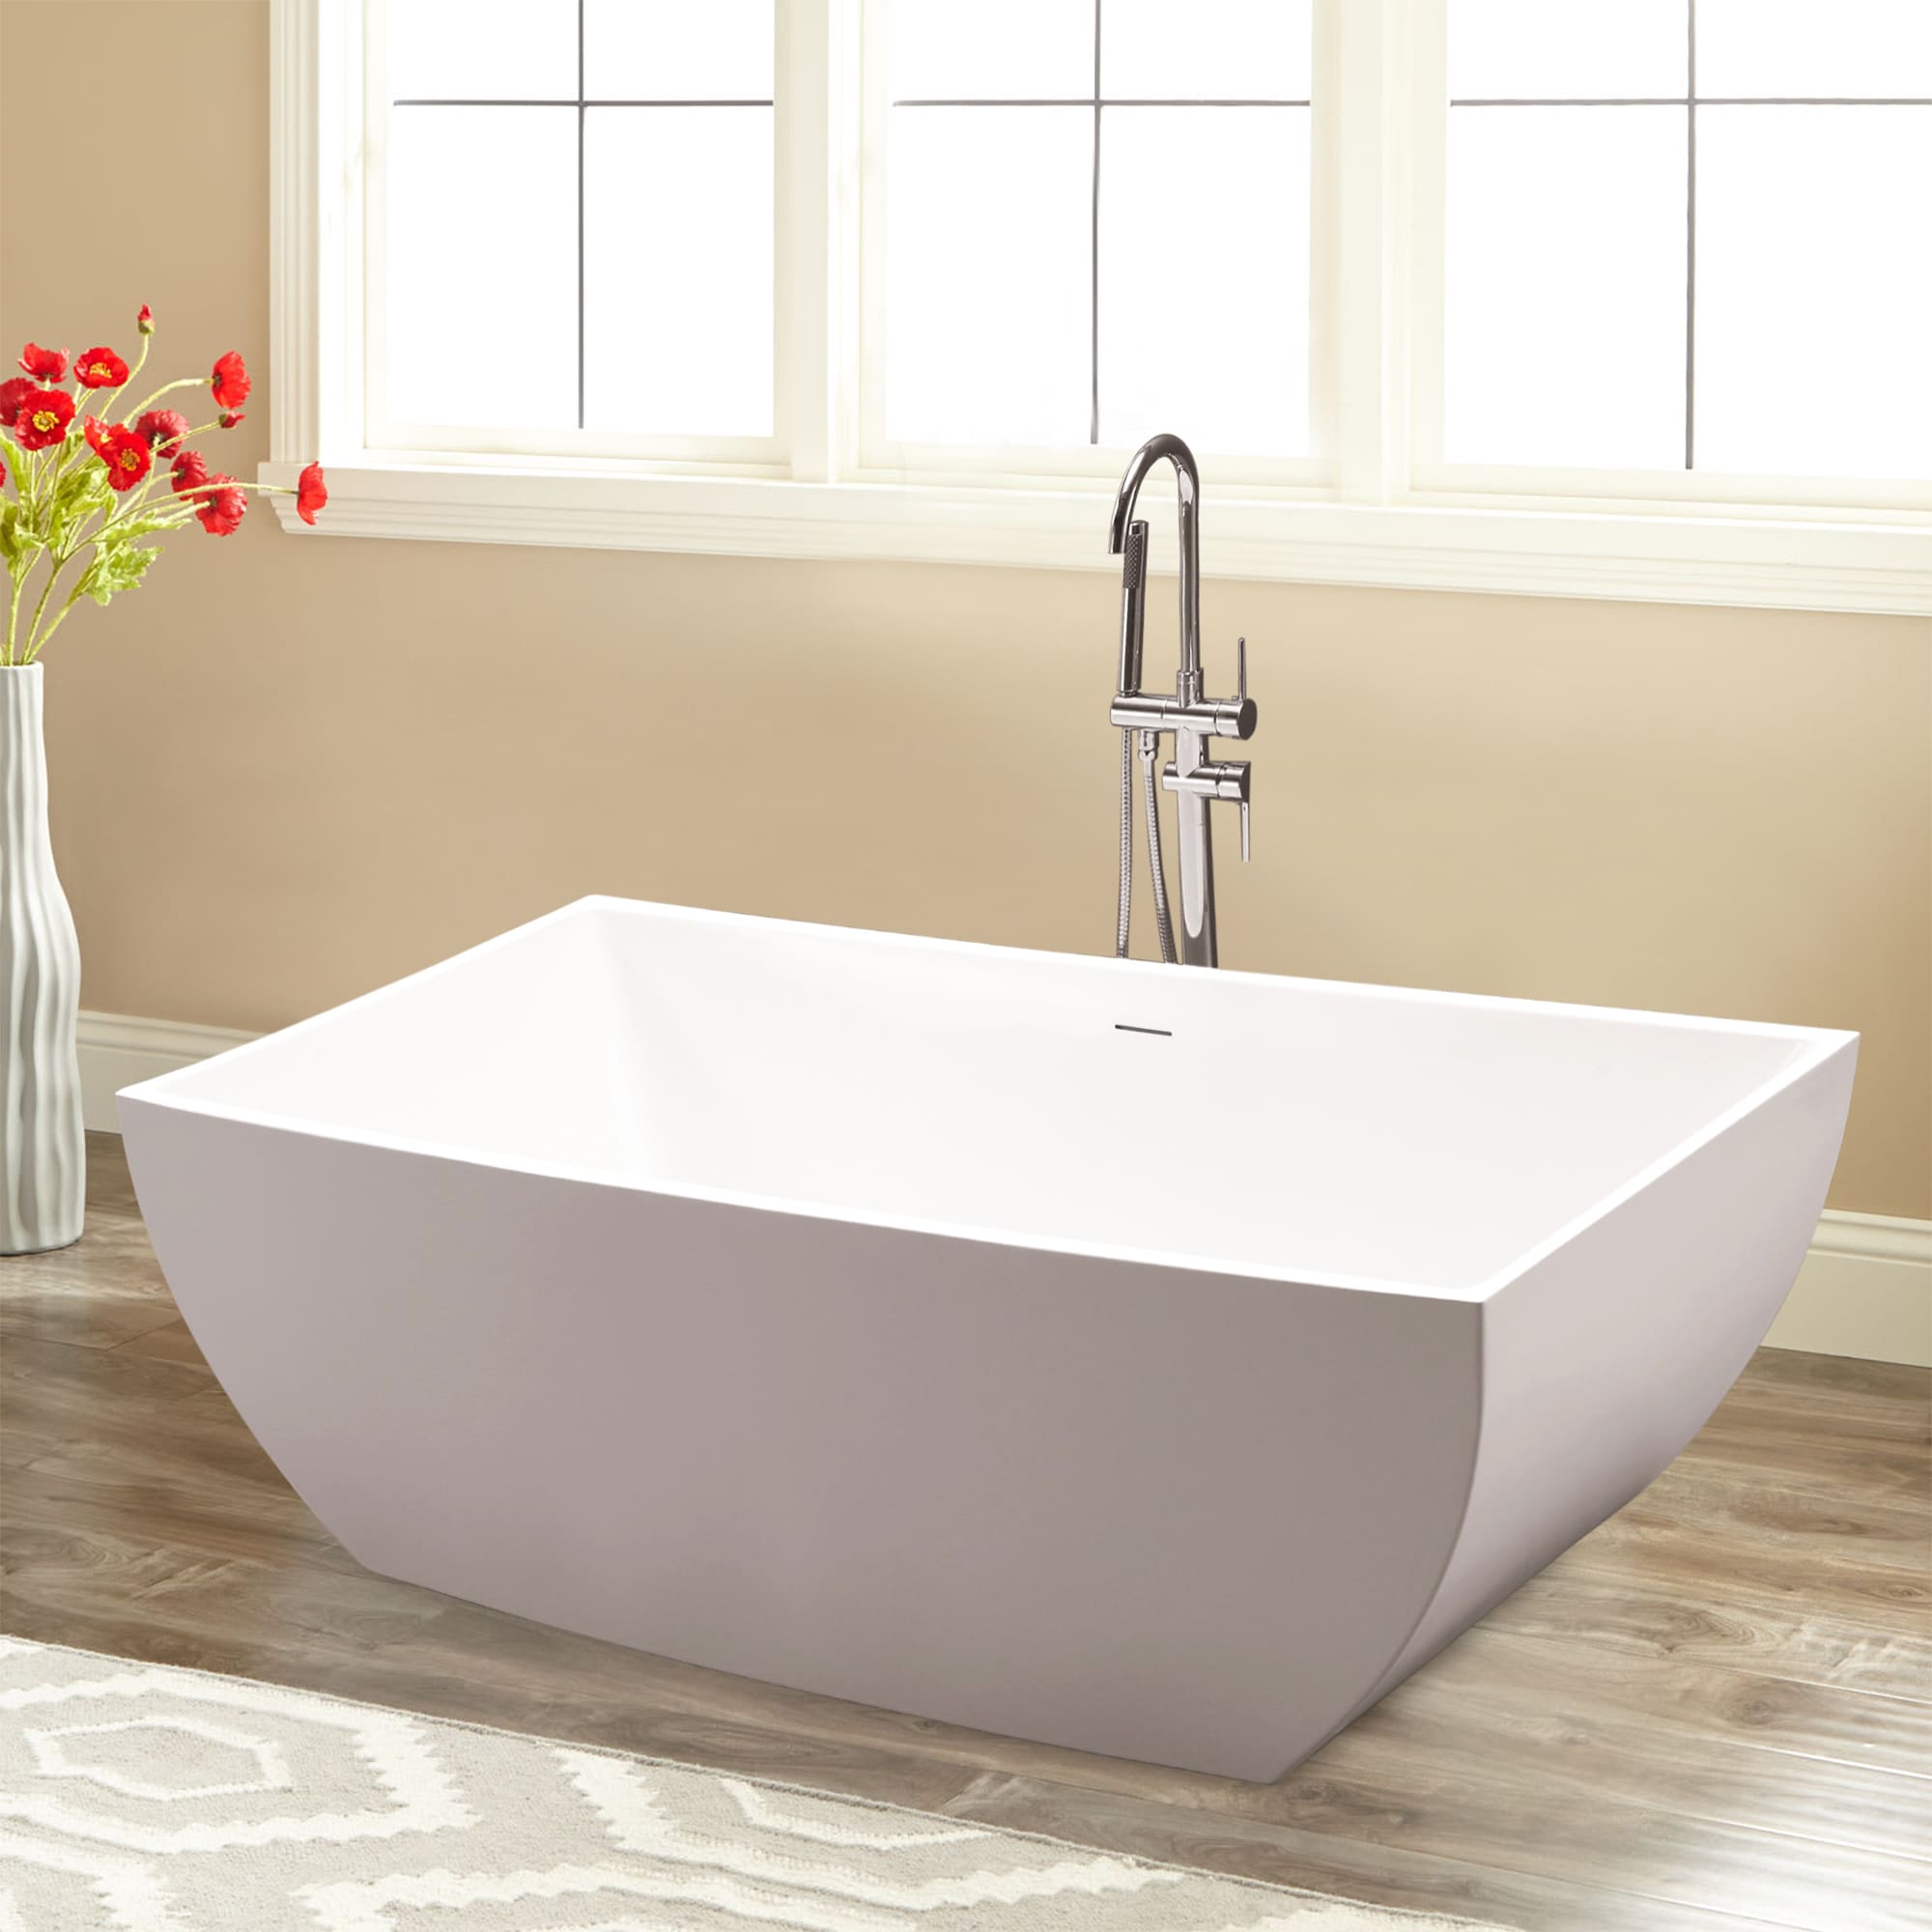 60'' x 32'' Freestanding Tub with Integrated Waste and Overflow in